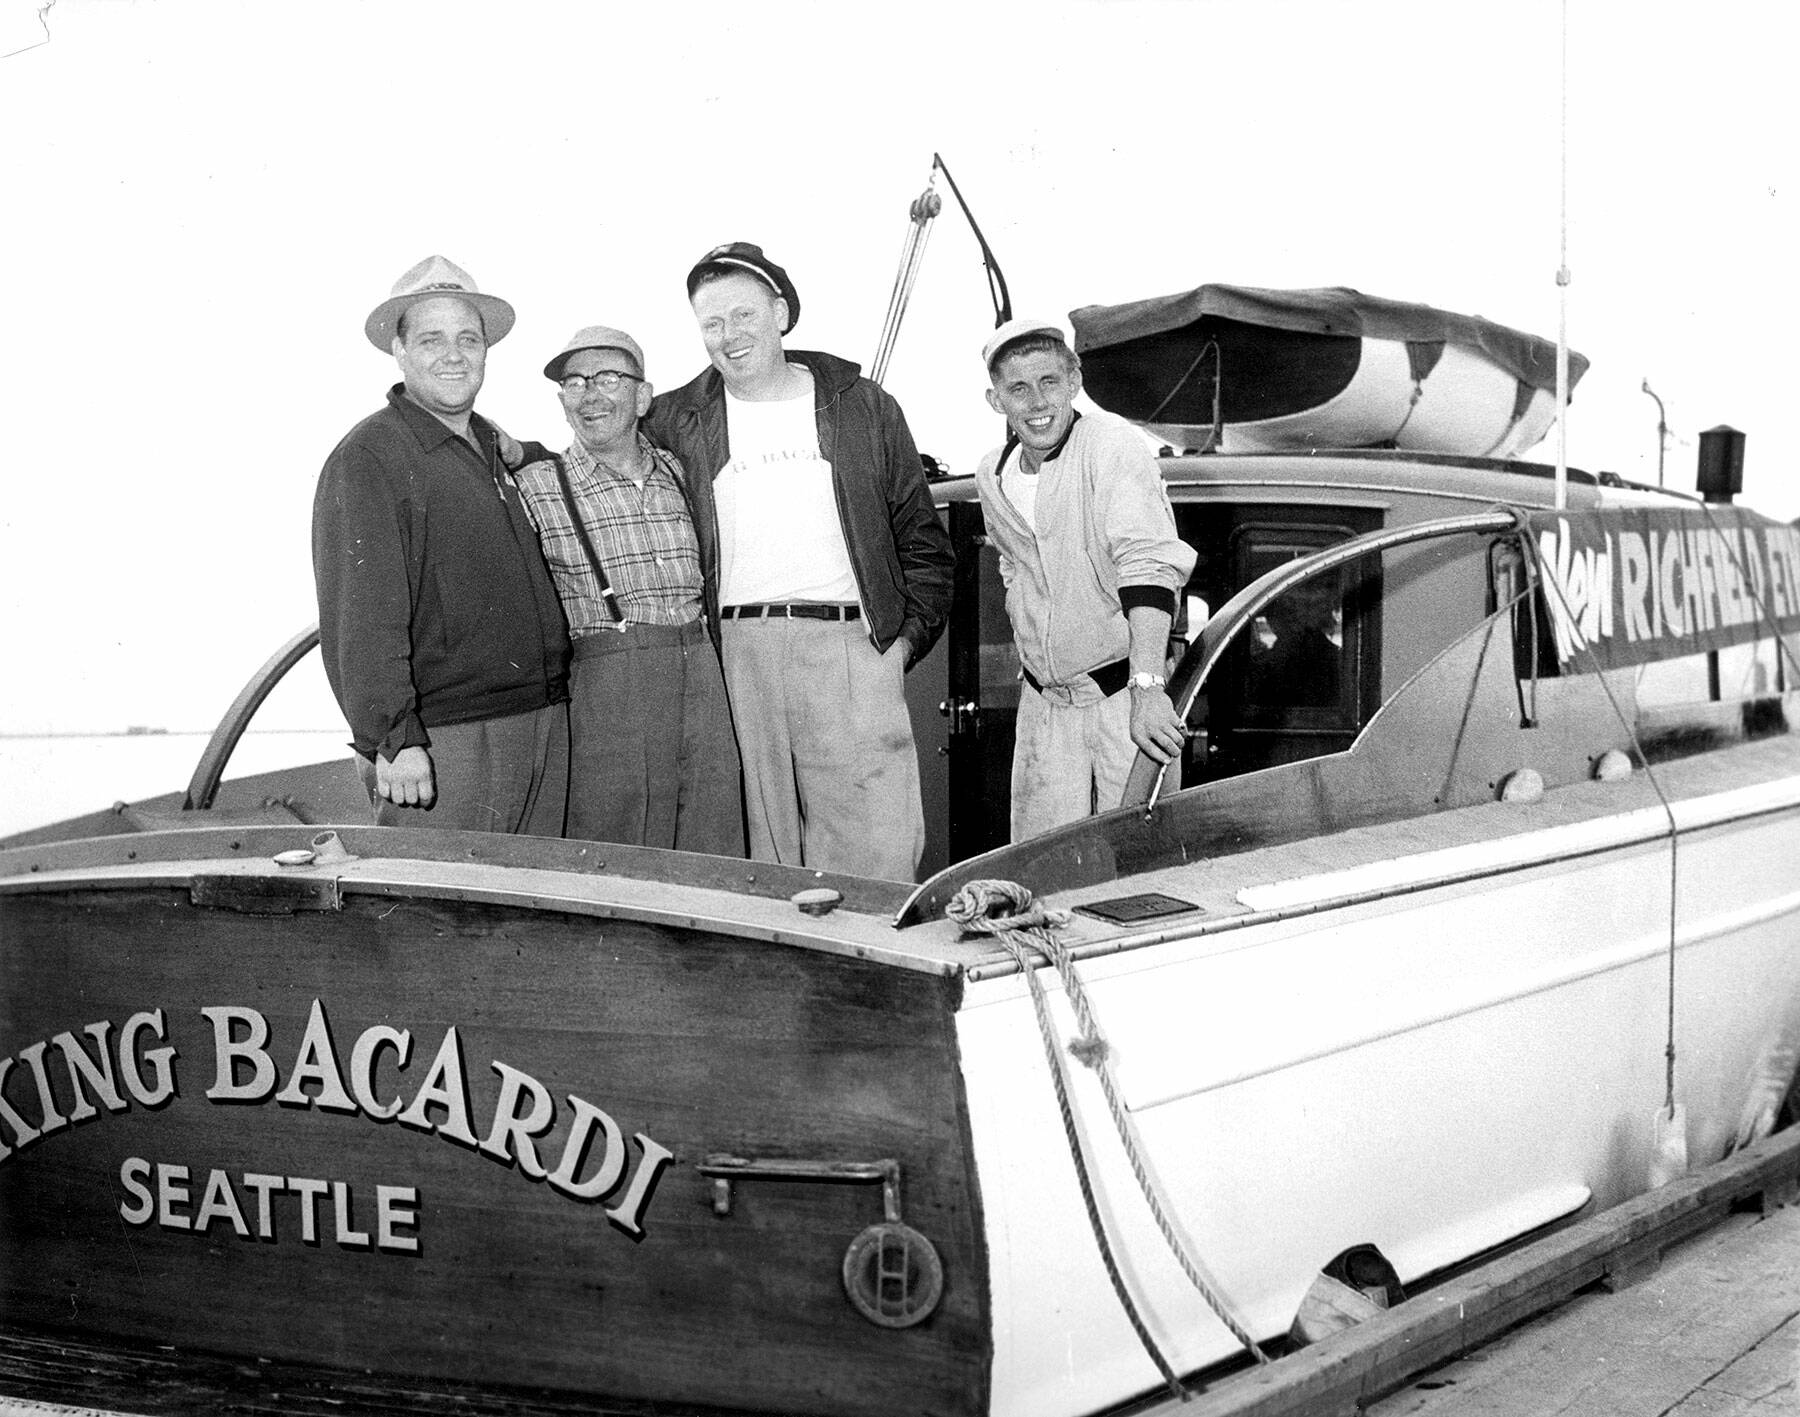 Long-distance swimmer Bert Thomas, far left, Bud Olsen, second from right, and the rest of his support team aboard the King Bacardi. (Courtesy of North Olympic History Center)